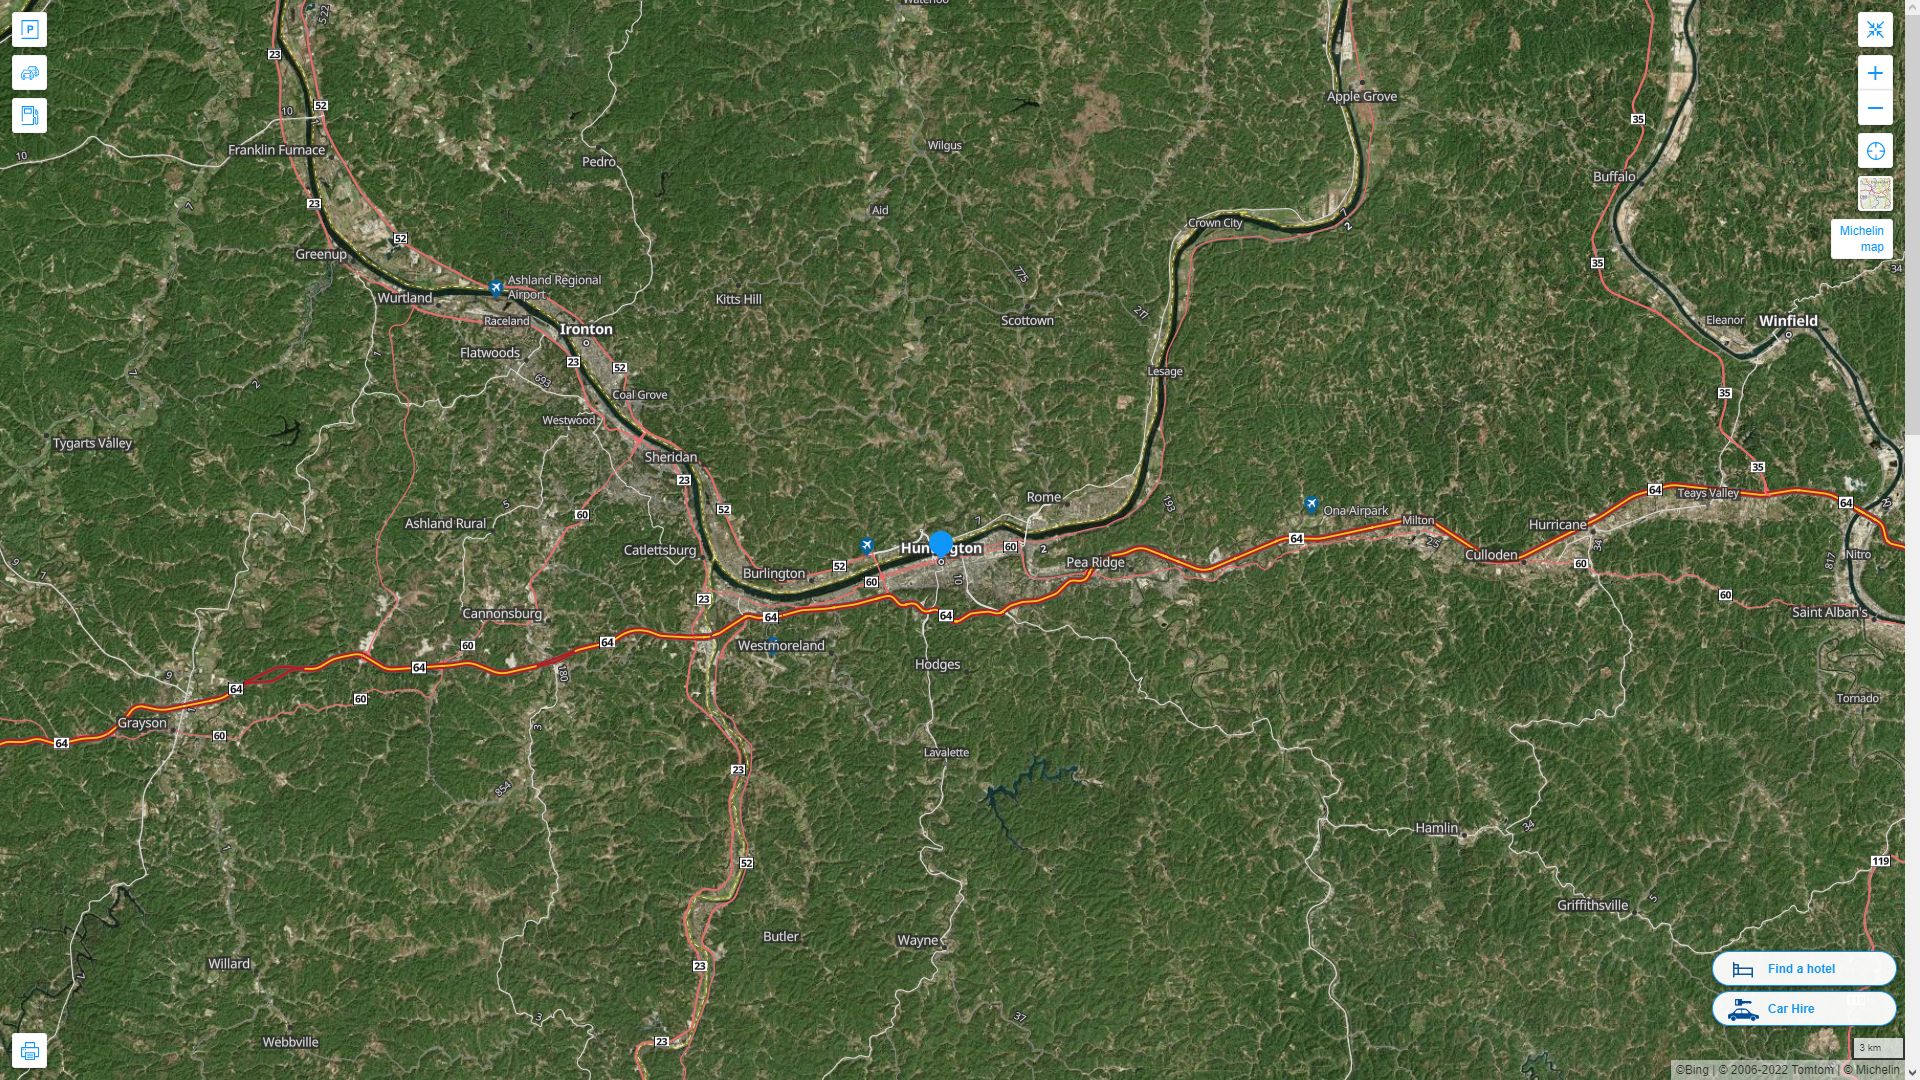 Huntington West Virginia Highway and Road Map with Satellite View